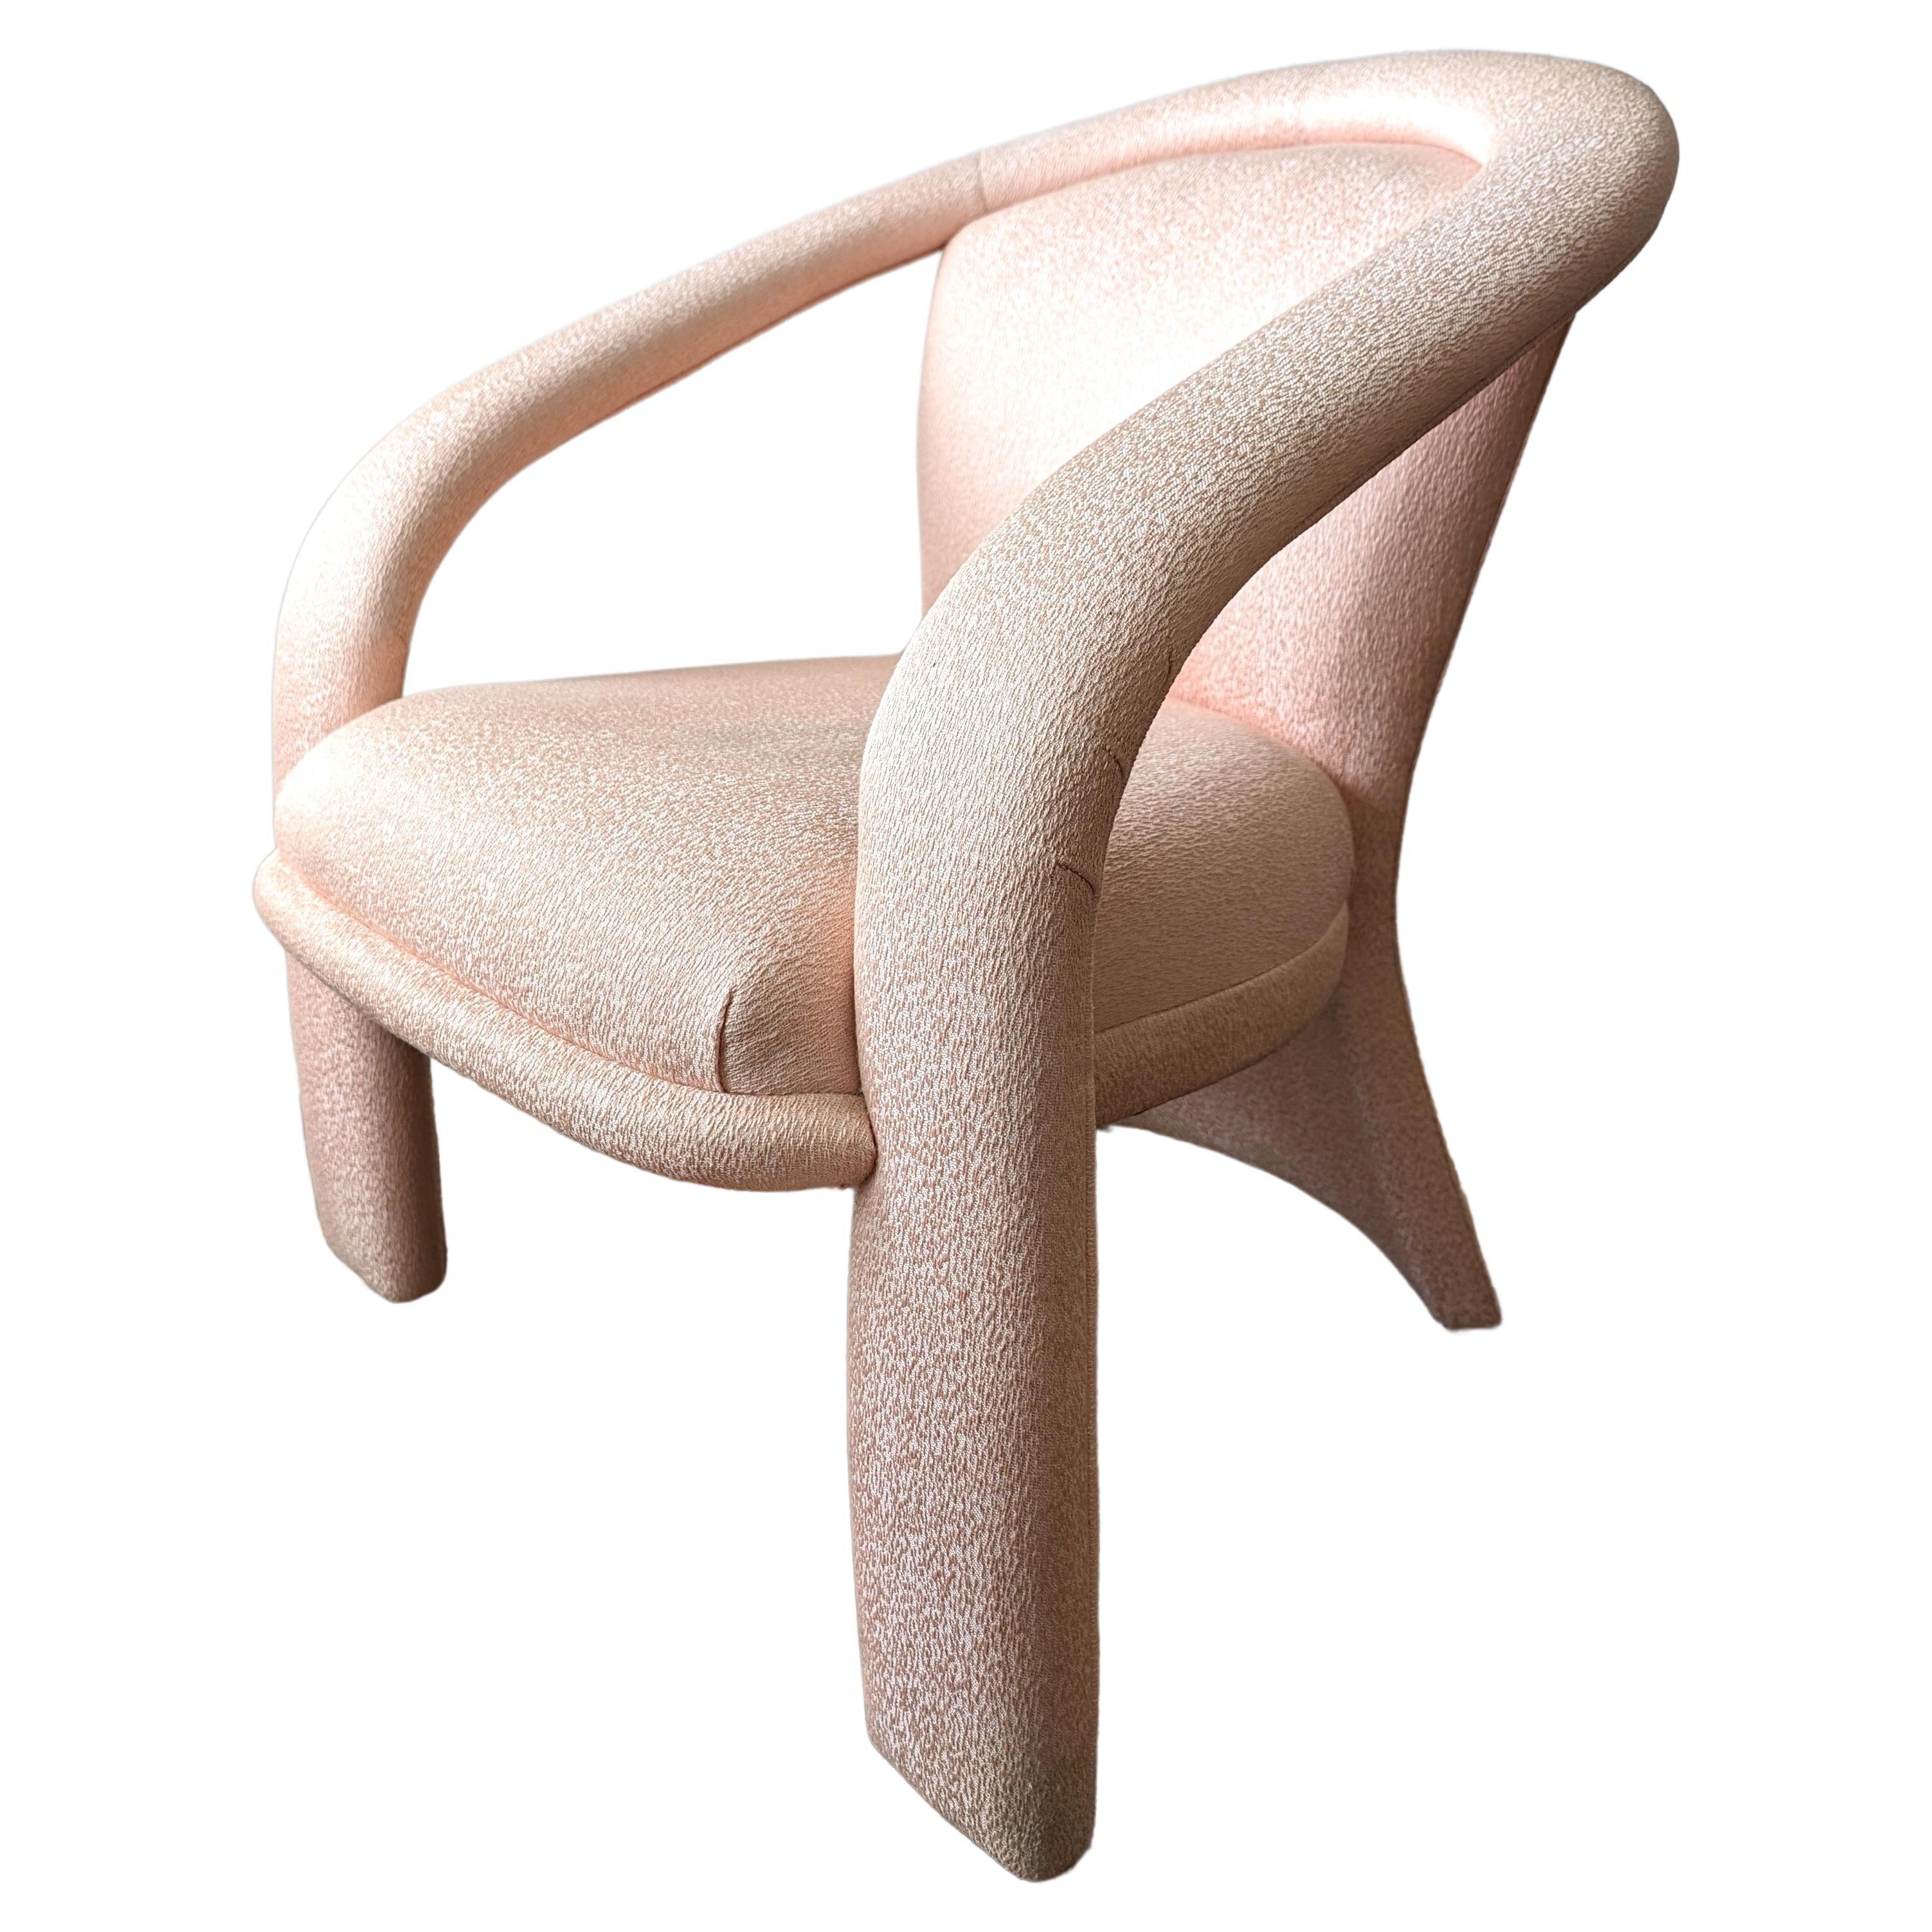 Sculptural postmodern pink lounge chair, Marge Carson for Carson Furniture 1980s